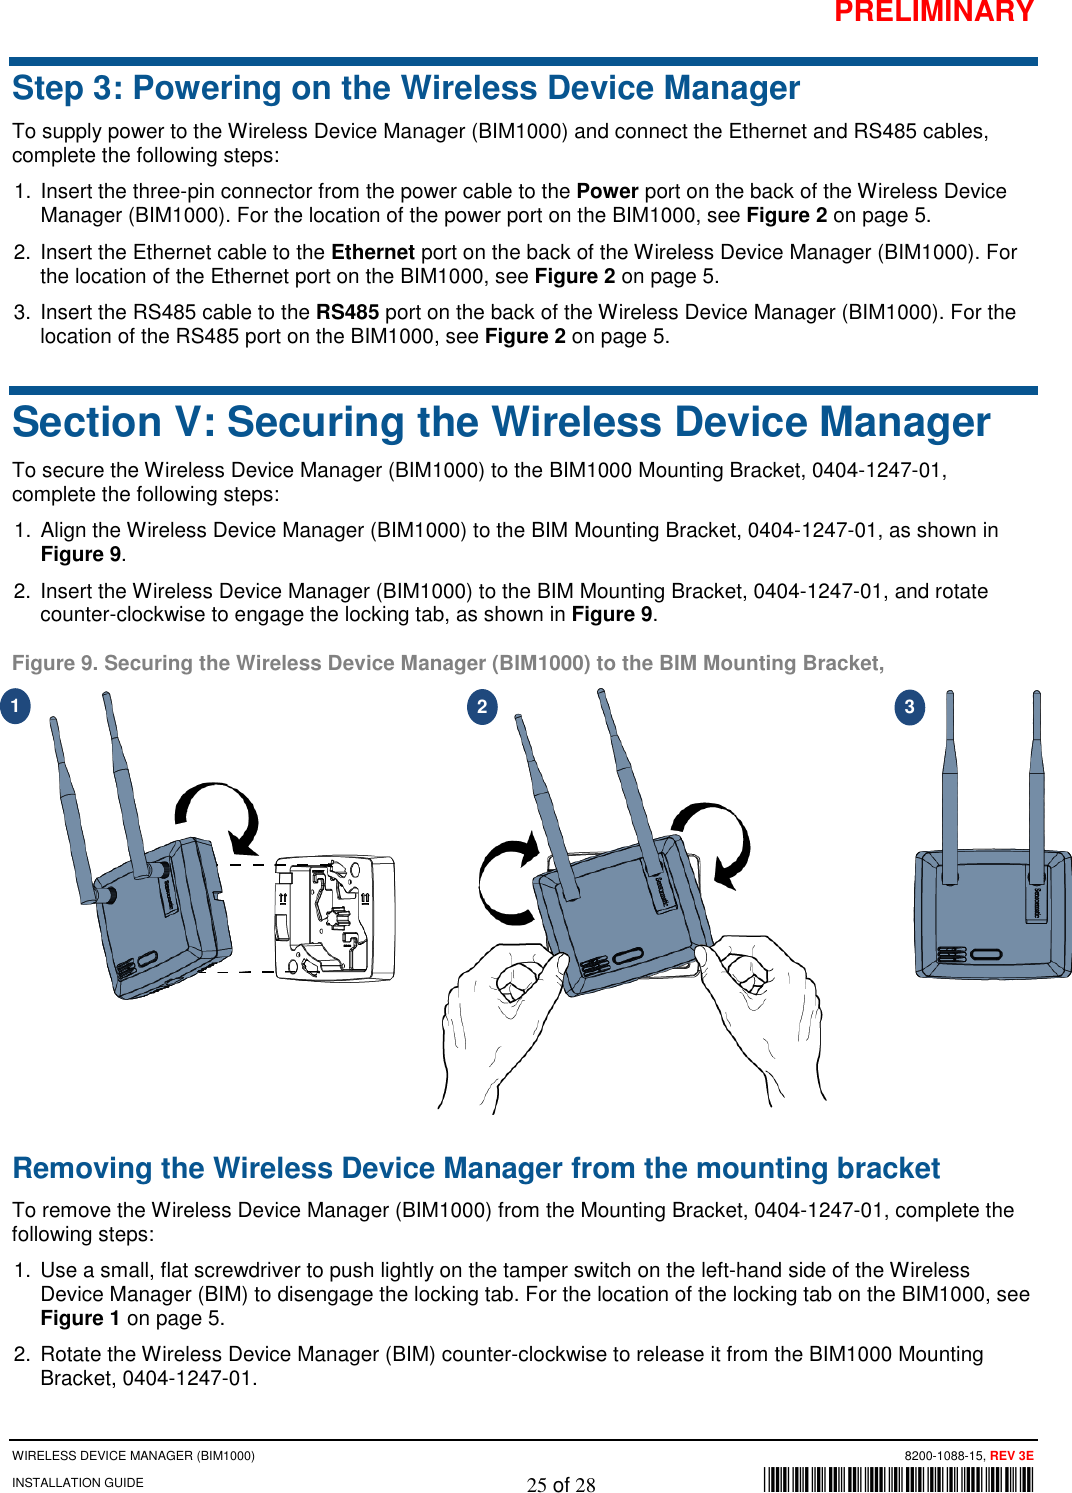 PRELIMINARY WIRELESS DEVICE MANAGER (BIM1000)      8200-1088-15, REV 3E INSTALLATION GUIDE    25 of 28        *8200-1088-15* Step 3: Powering on the Wireless Device Manager To supply power to the Wireless Device Manager (BIM1000) and connect the Ethernet and RS485 cables, complete the following steps:  1. Insert the three-pin connector from the power cable to the Power port on the back of the Wireless Device Manager (BIM1000). For the location of the power port on the BIM1000, see Figure 2 on page 5. 2. Insert the Ethernet cable to the Ethernet port on the back of the Wireless Device Manager (BIM1000). For the location of the Ethernet port on the BIM1000, see Figure 2 on page 5. 3. Insert the RS485 cable to the RS485 port on the back of the Wireless Device Manager (BIM1000). For the location of the RS485 port on the BIM1000, see Figure 2 on page 5.  Section V: Securing the Wireless Device Manager To secure the Wireless Device Manager (BIM1000) to the BIM1000 Mounting Bracket, 0404-1247-01, complete the following steps: 1. Align the Wireless Device Manager (BIM1000) to the BIM Mounting Bracket, 0404-1247-01, as shown in Figure 9. 2. Insert the Wireless Device Manager (BIM1000) to the BIM Mounting Bracket, 0404-1247-01, and rotate counter-clockwise to engage the locking tab, as shown in Figure 9. Figure 9. Securing the Wireless Device Manager (BIM1000) to the BIM Mounting Bracket,   Removing the Wireless Device Manager from the mounting bracket To remove the Wireless Device Manager (BIM1000) from the Mounting Bracket, 0404-1247-01, complete the following steps: 1. Use a small, flat screwdriver to push lightly on the tamper switch on the left-hand side of the Wireless Device Manager (BIM) to disengage the locking tab. For the location of the locking tab on the BIM1000, see Figure 1 on page 5. 2. Rotate the Wireless Device Manager (BIM) counter-clockwise to release it from the BIM1000 Mounting Bracket, 0404-1247-01. 1 2 3 